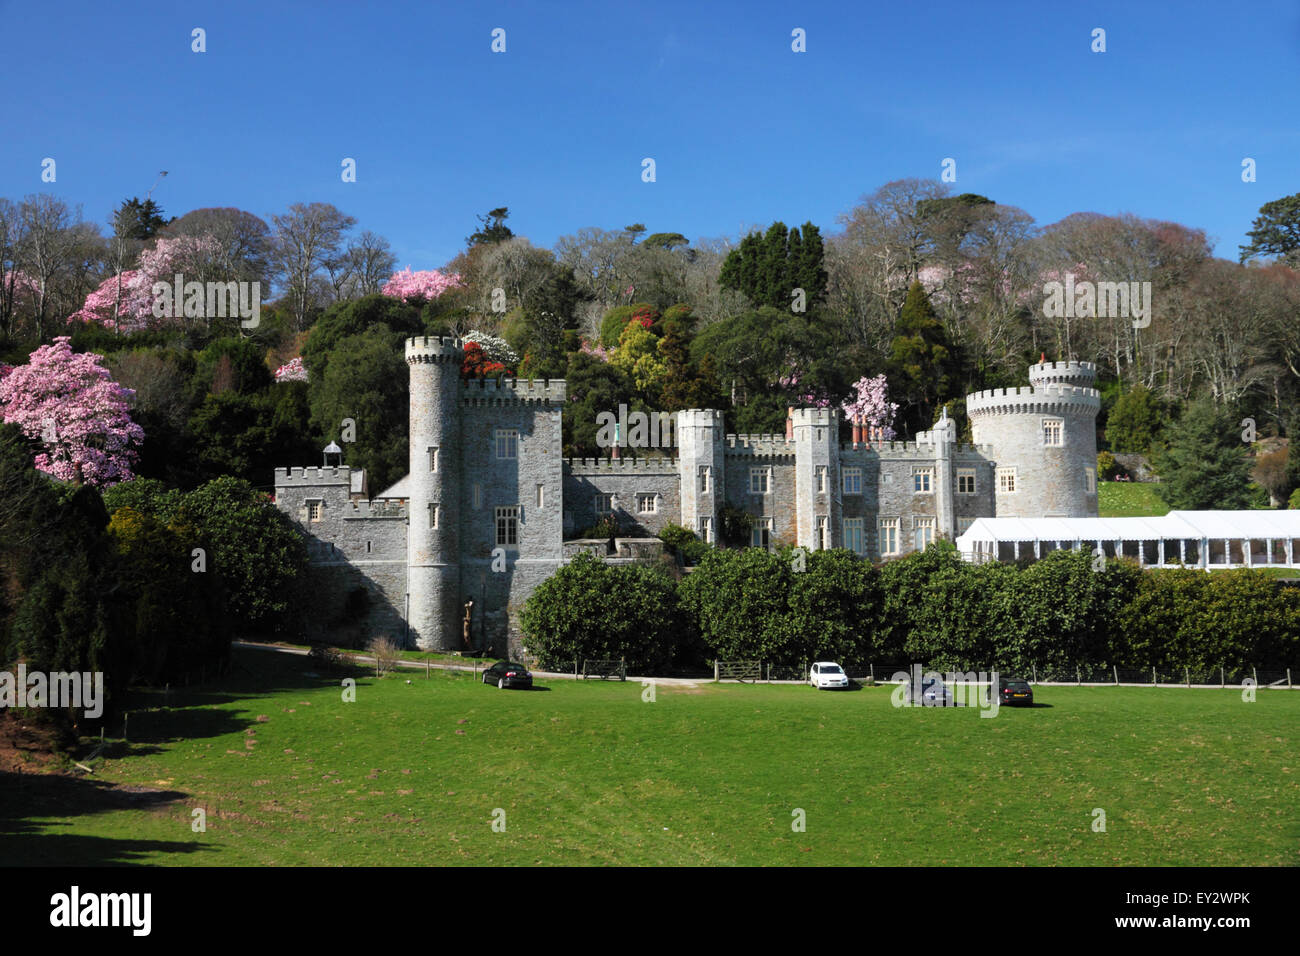 A turreted castle in parkland set against a backdrop of magnolias and camelias. Stock Photo